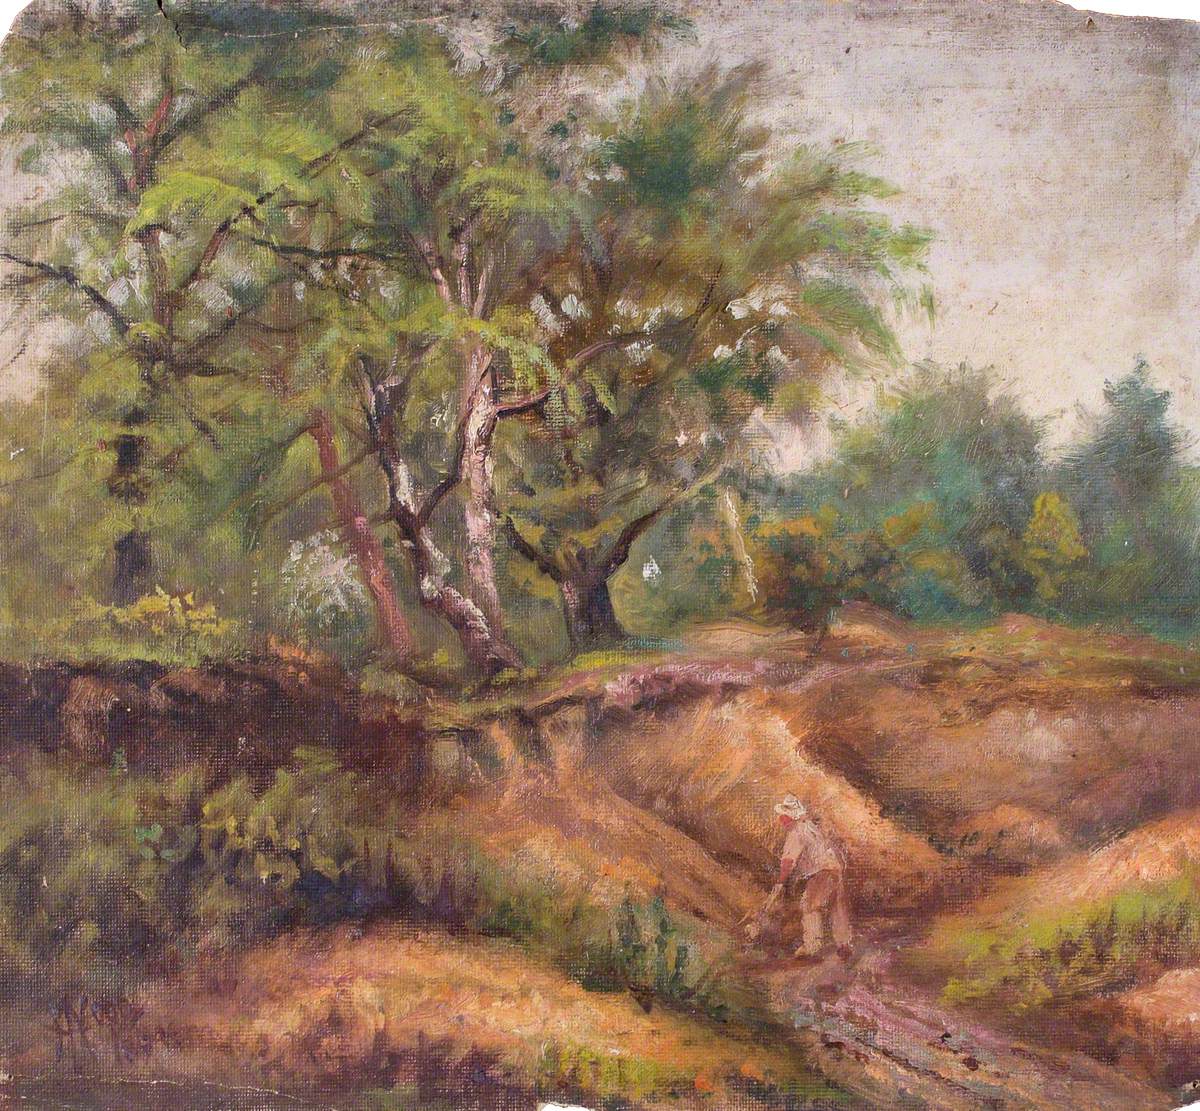 Landscape with Trees and a Man at Work